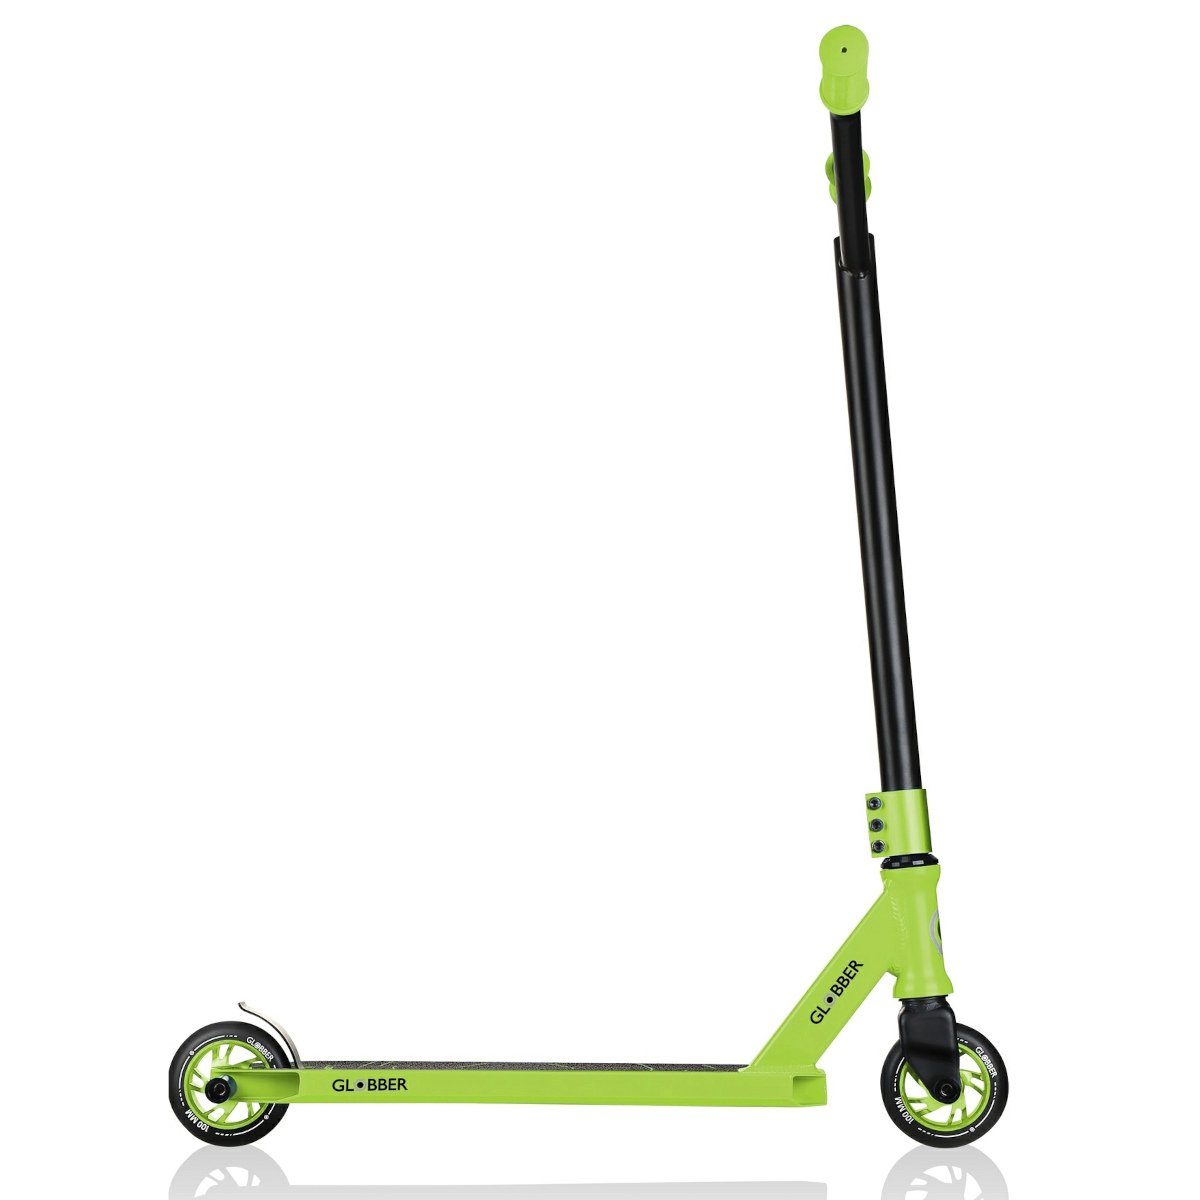 540 Sports & sports Stuntscooter Schwarz-Lime Authentic Grün authentic toys Laufrad GS Globber